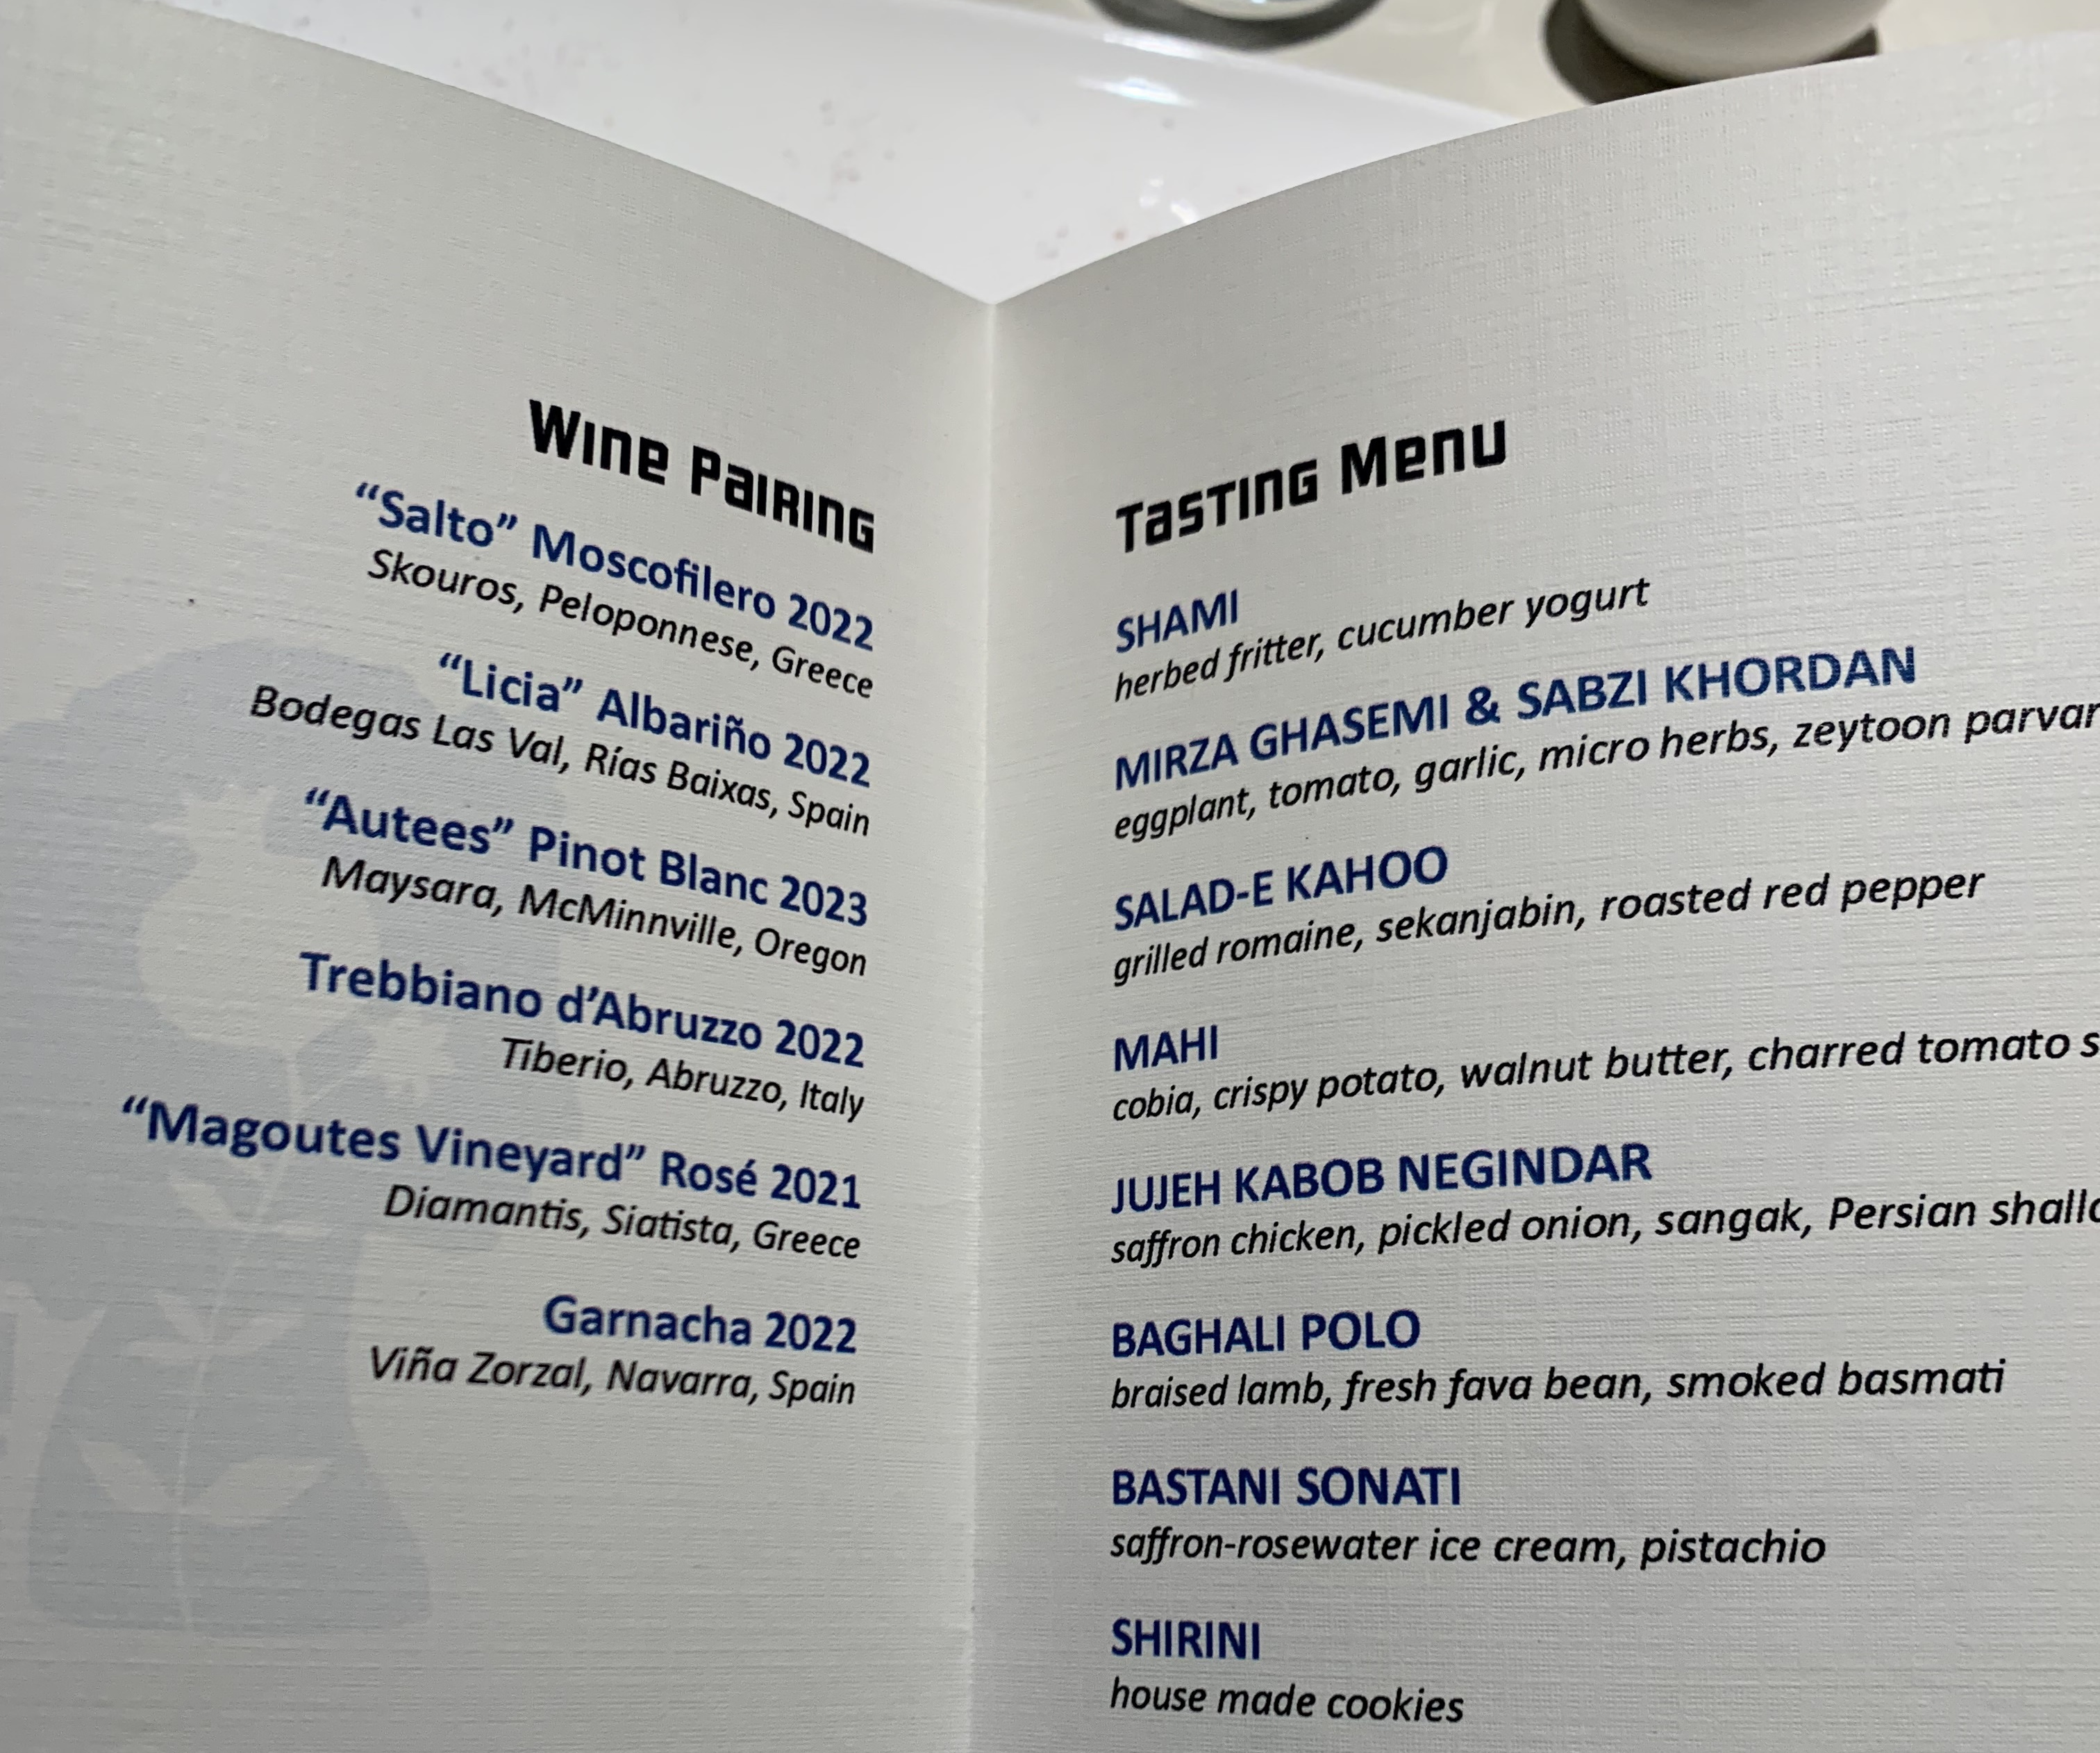 A menu listing all the courses and the wine pairings